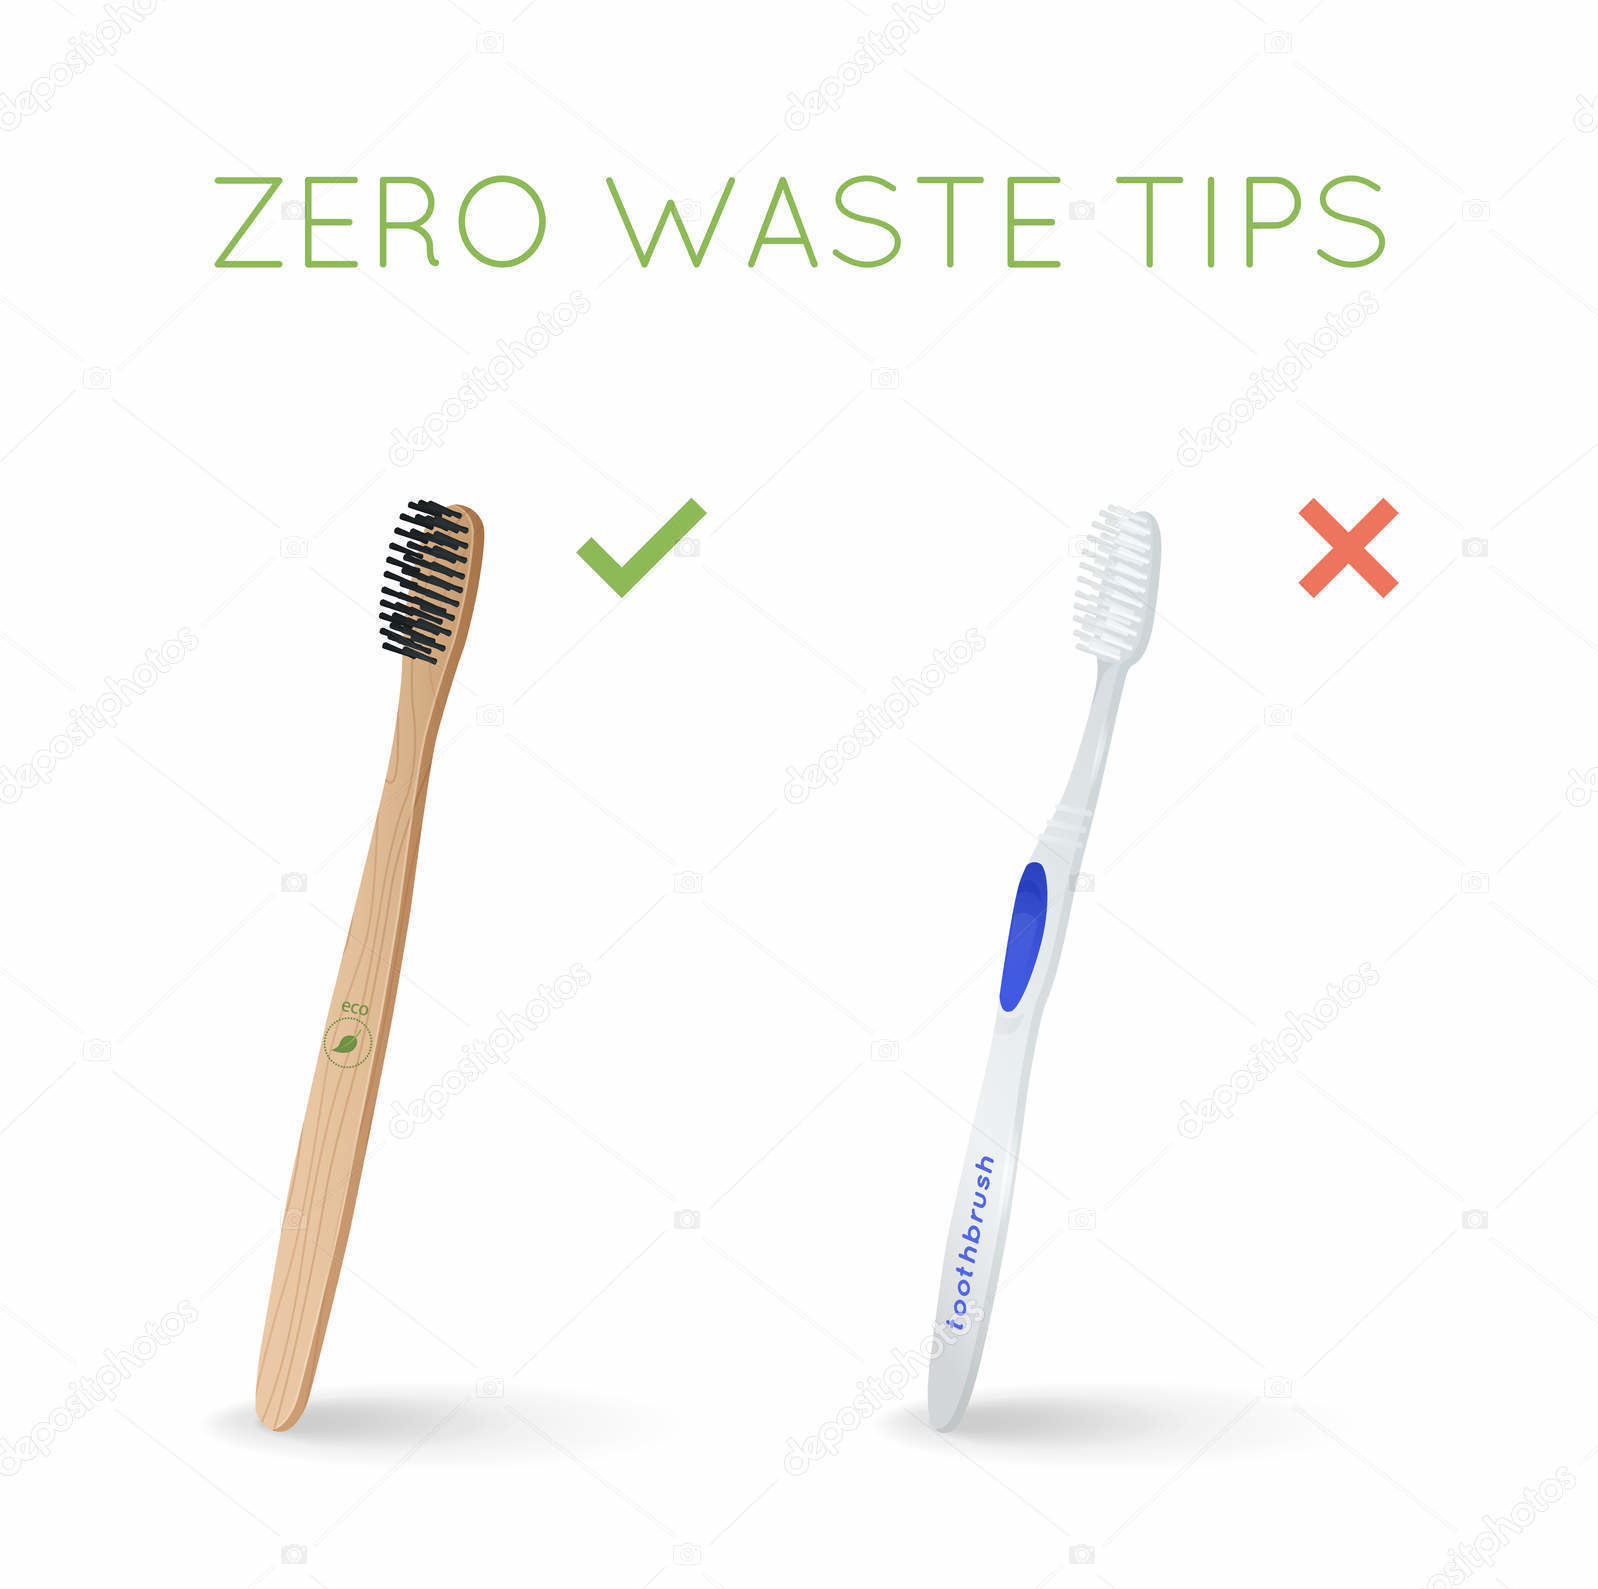 Bamboo toothbrush instead of plastic toothbrush. Zero wast tips. ECO and healthy lifestyle. The Bambu shop, Bamboo Products online